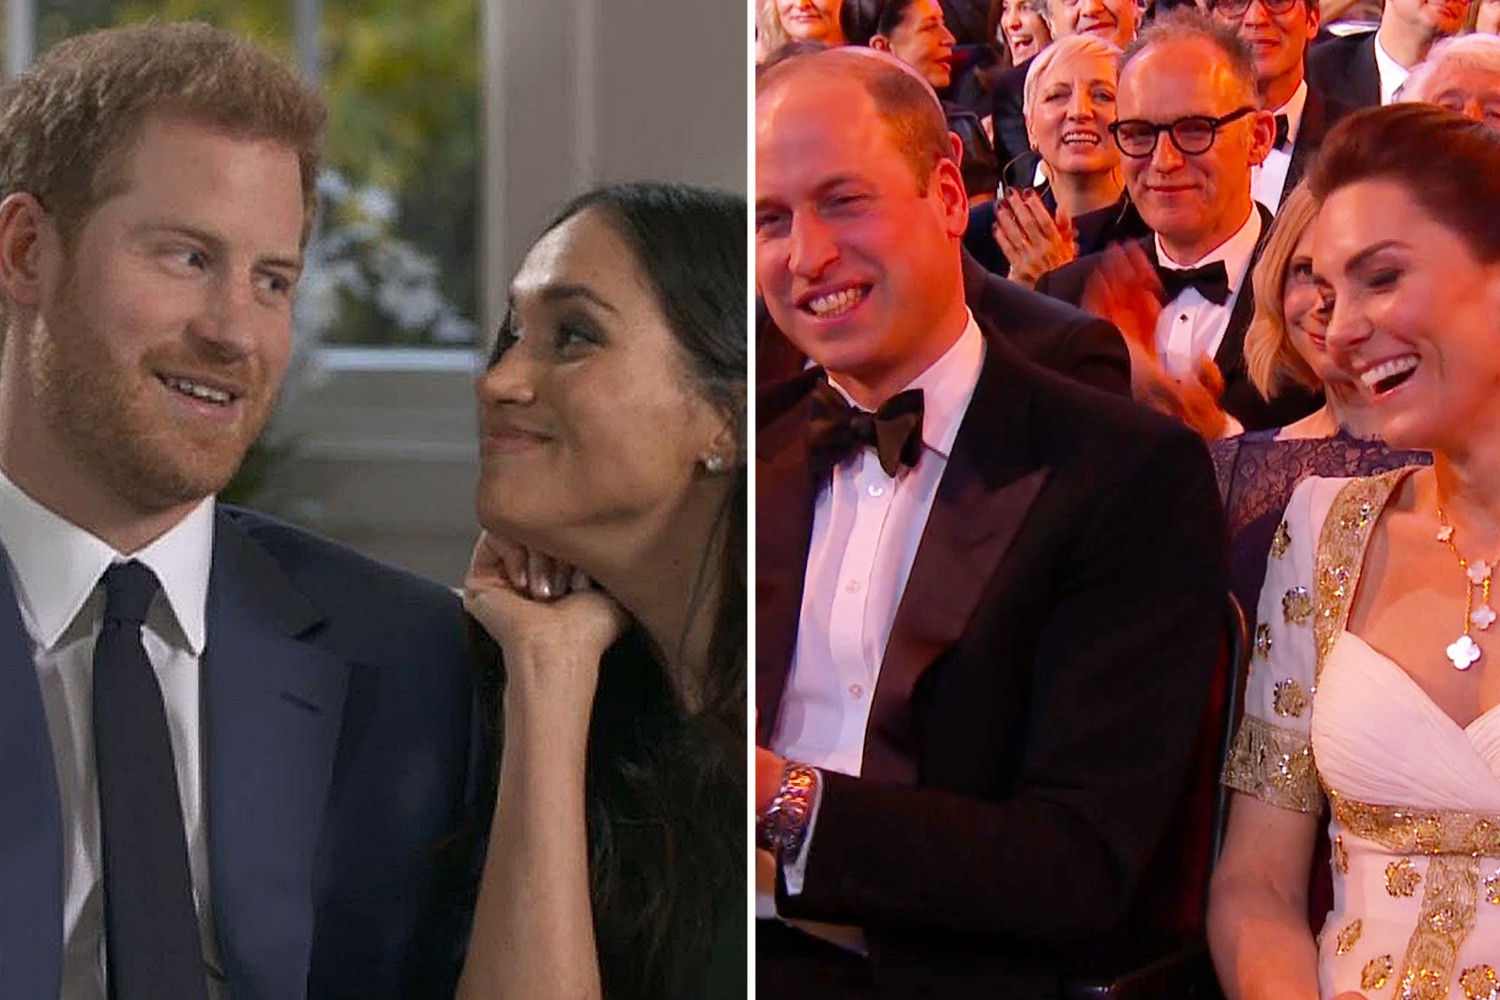 Meghan Markle and Prince Harry, Prince William and Kate Middleton